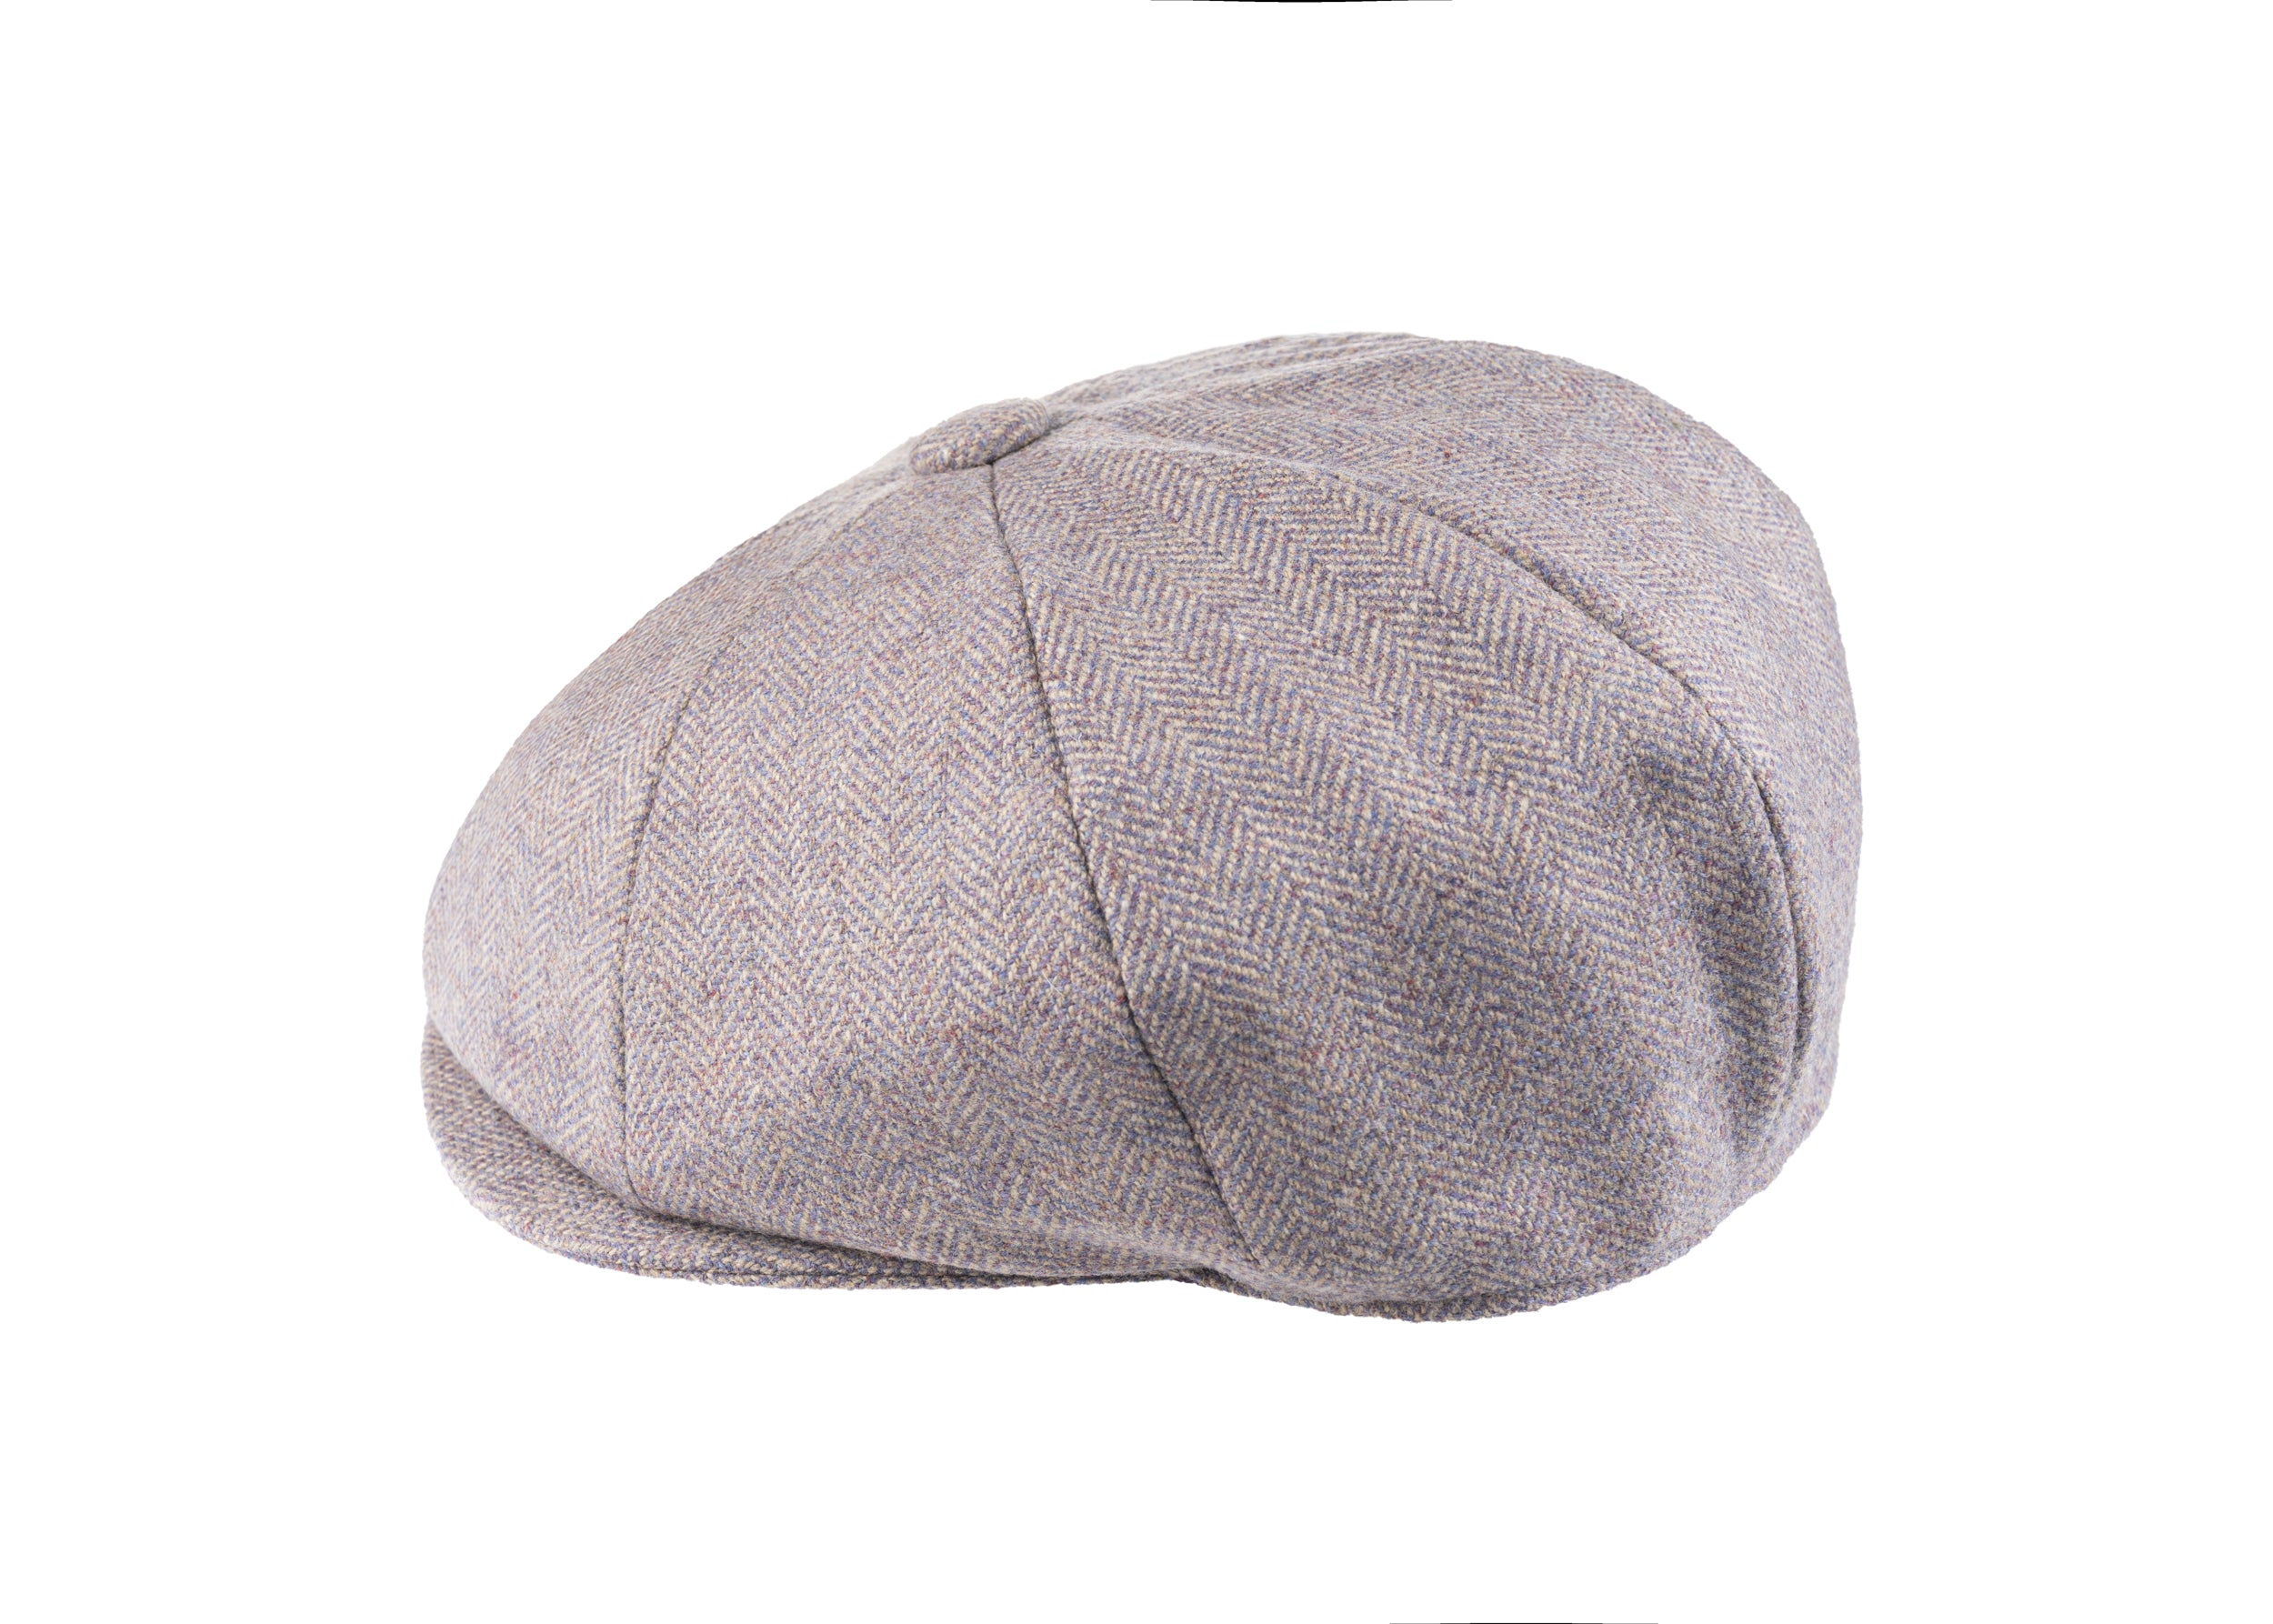 Lovat Mill Teviot Tweed Made in England 8 Piece Cap in Heather